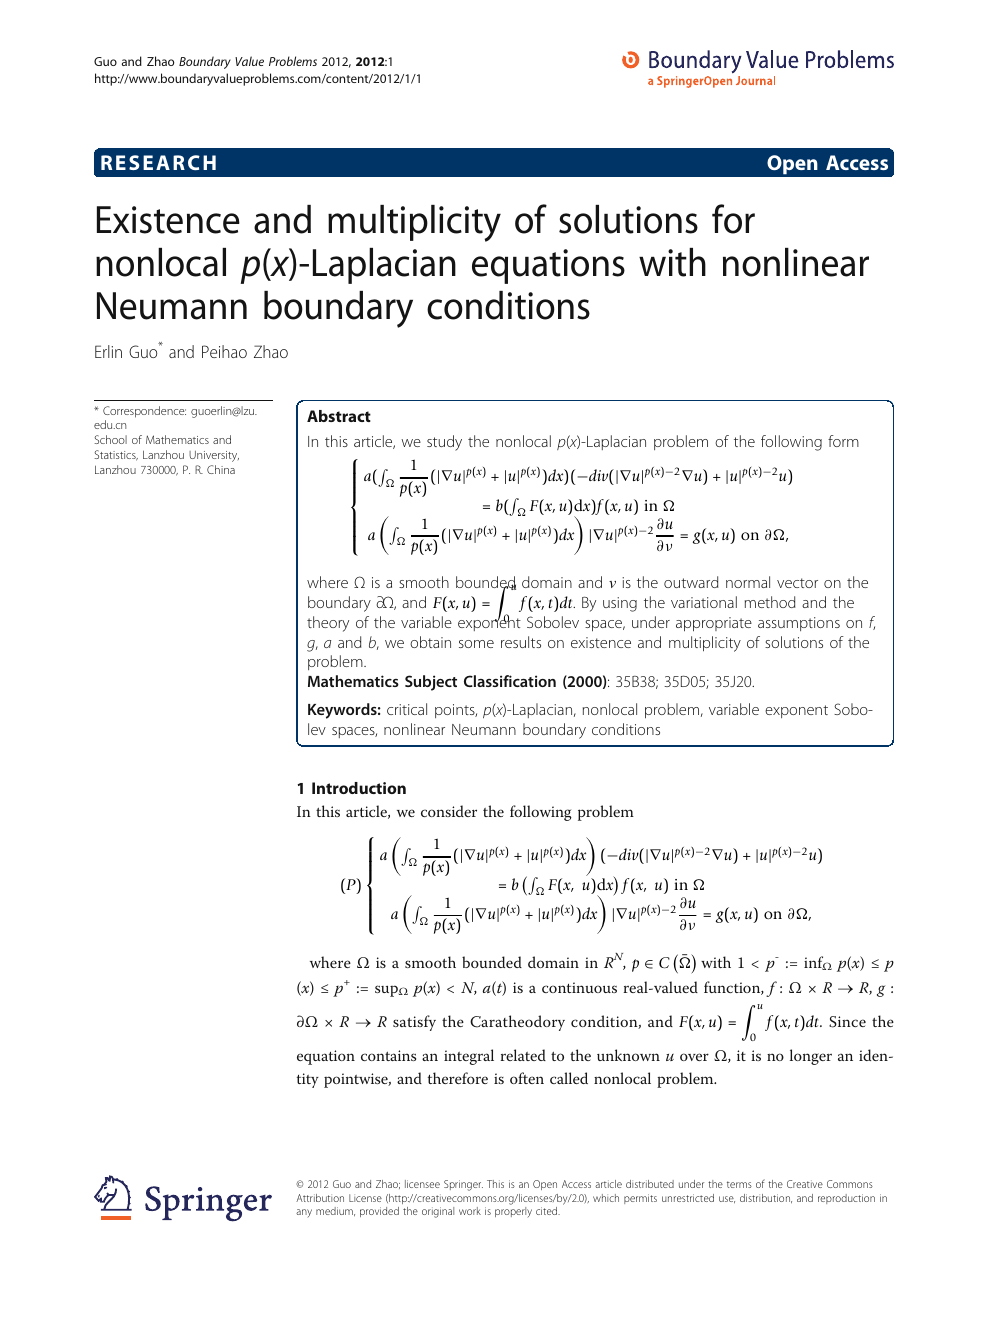 Existence And Multiplicity Of Solutions For Nonlocal P X Laplacian Equations With Nonlinear Neumann Boundary Conditions Topic Of Research Paper In Mathematics Download Scholarly Article Pdf And Read For Free On Cyberleninka Open